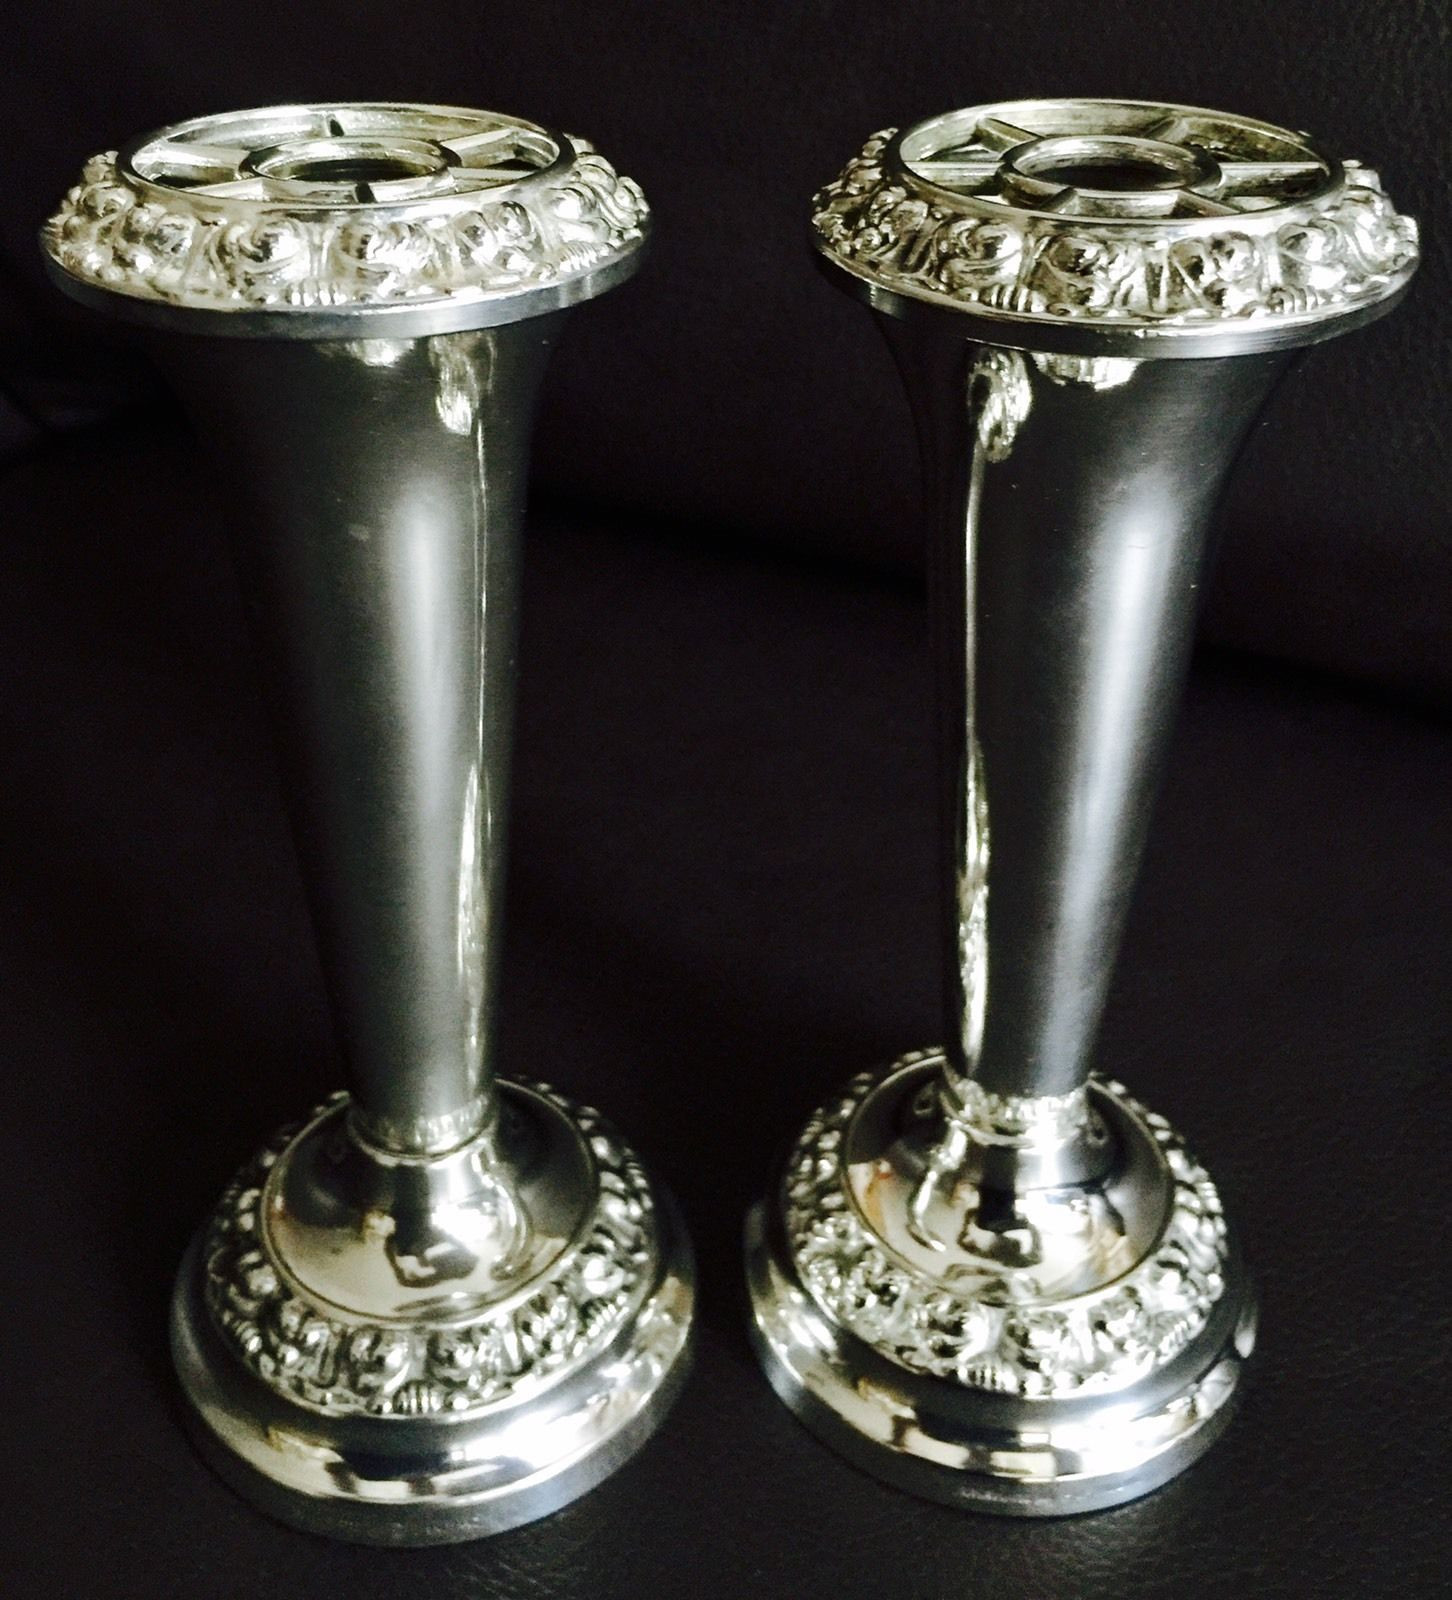 28 Famous Sterling Silver Bud Vase 2024 free download sterling silver bud vase of pair of superb vintage ian heath ltd ianthe english silver plated with pair of superb vintage ian heath ltd ianthe english silver plated bud vases